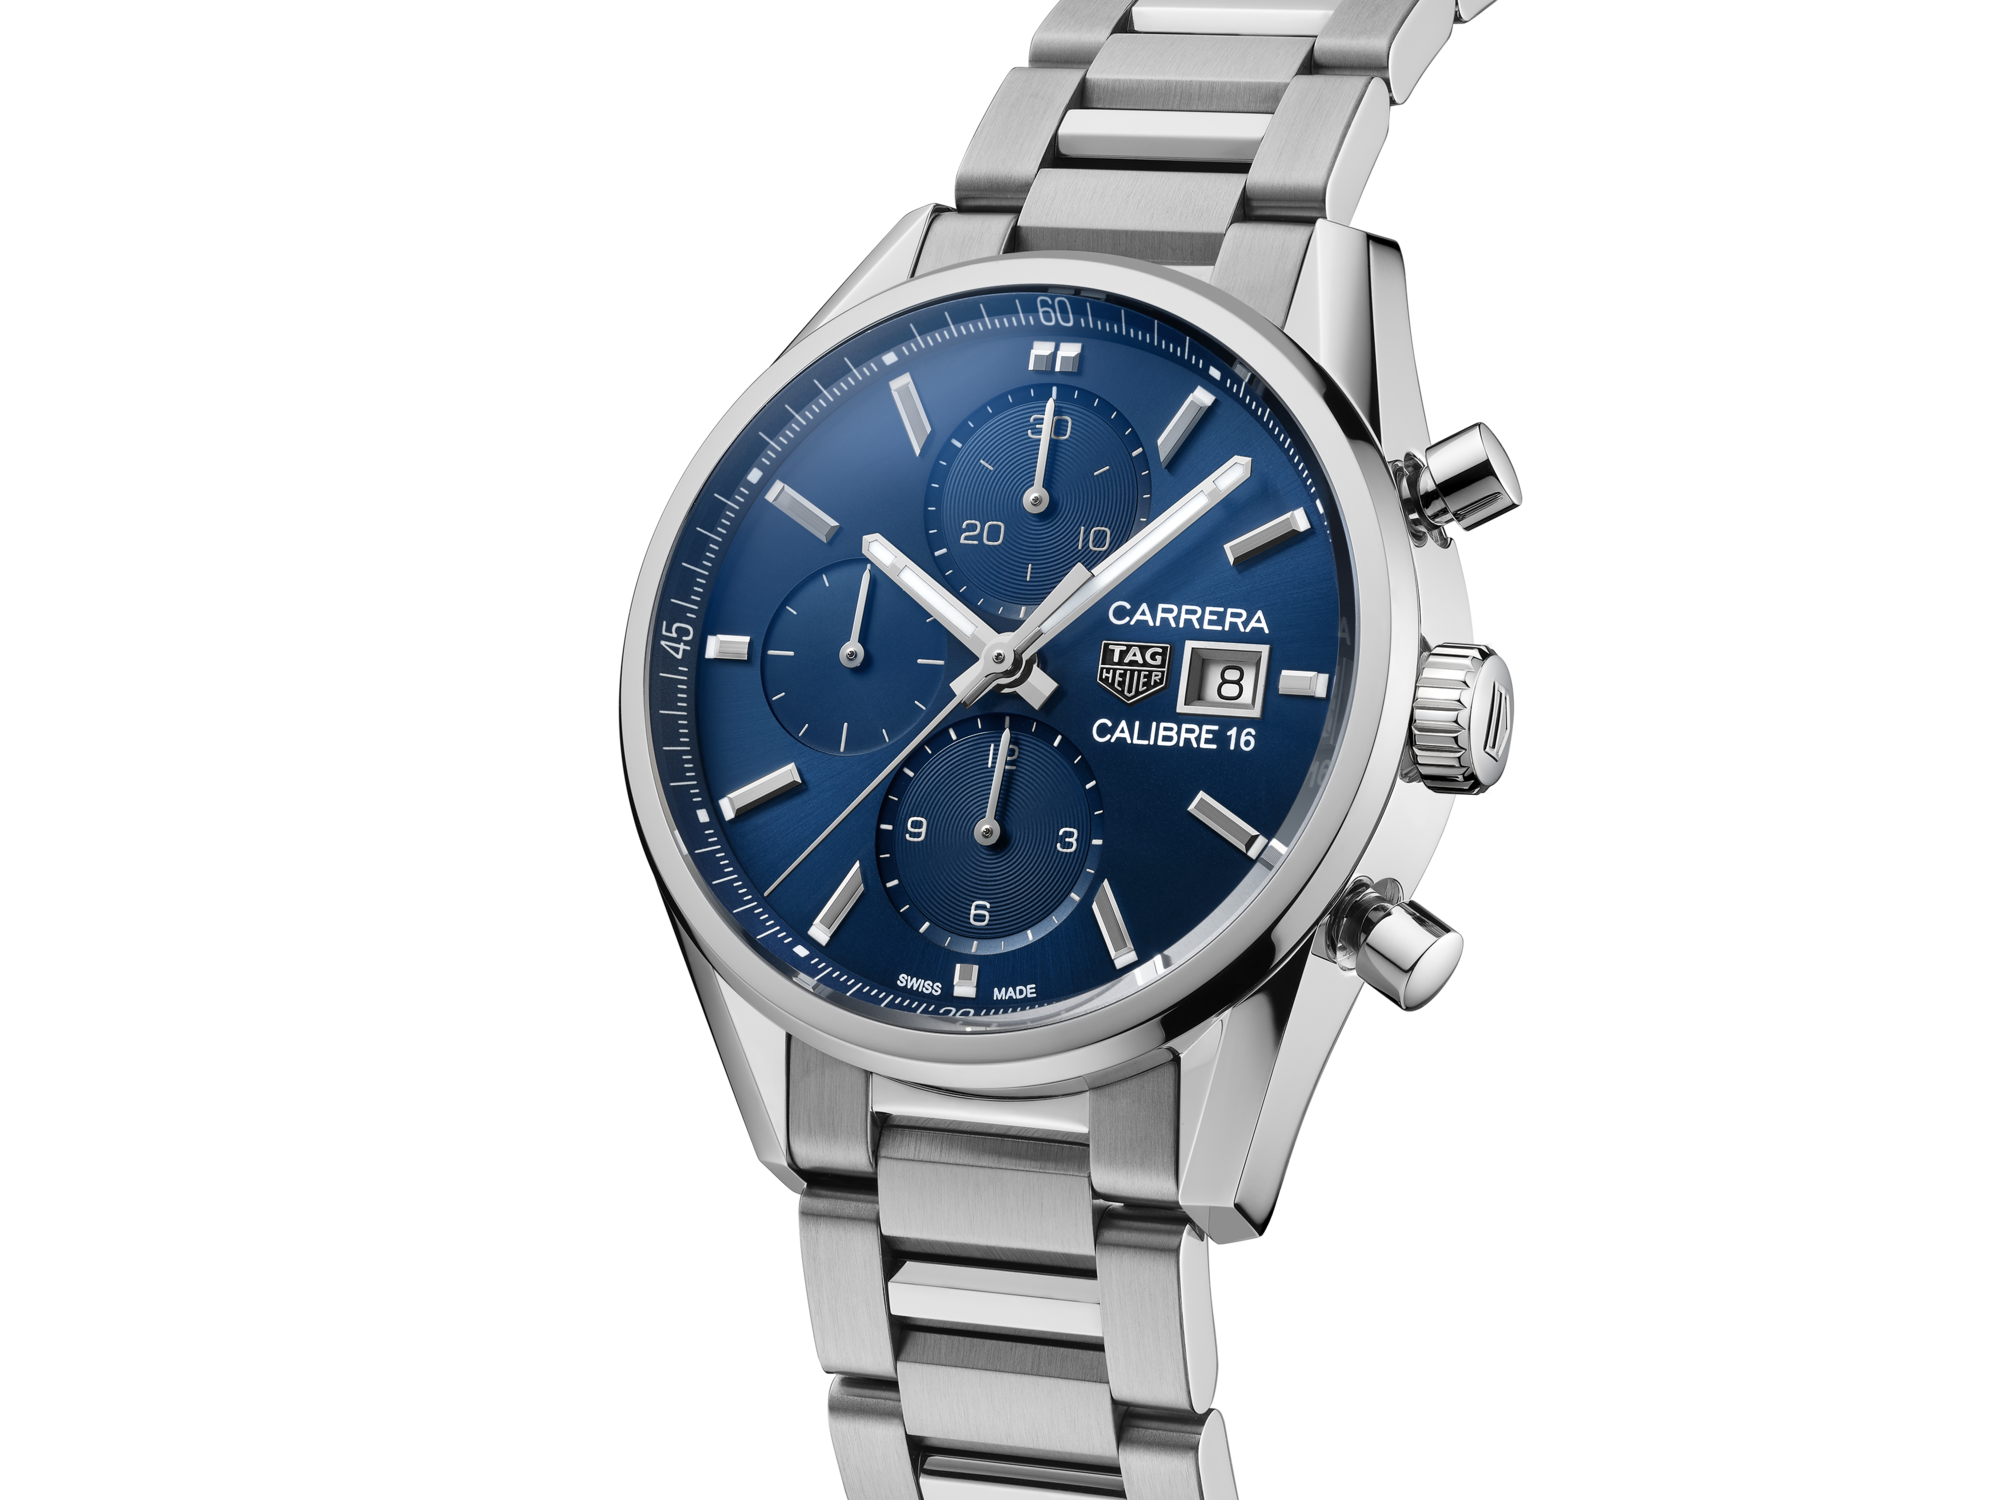  Tag Heuer Carrera Chronograph Automatic Blue Dial Men's Watch  CBM2112.BA0651 : Clothing, Shoes & Jewelry